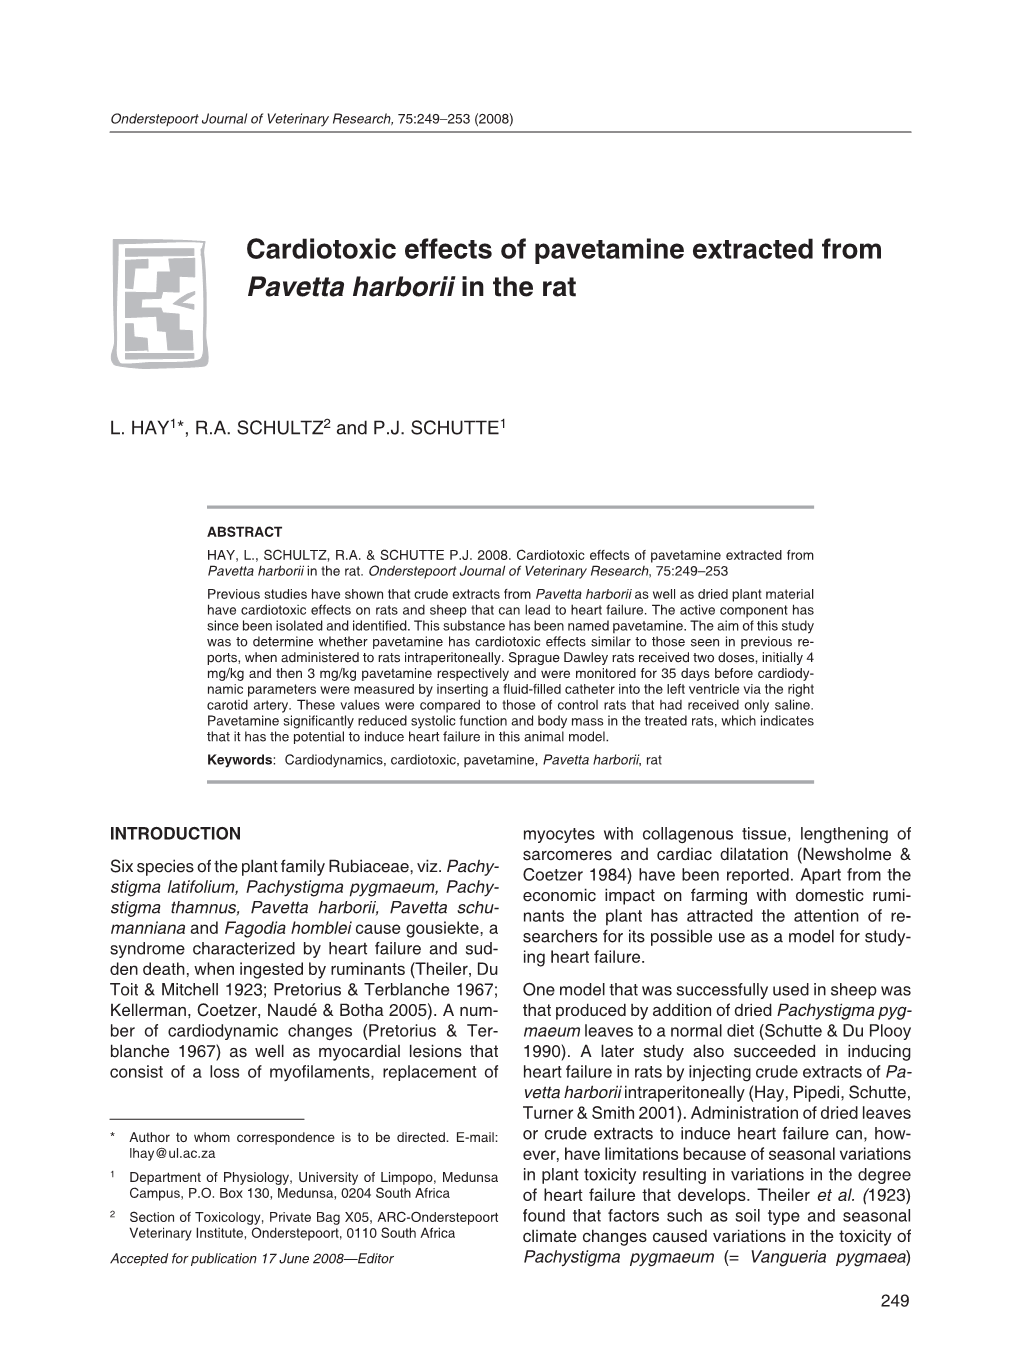 Cardiotoxic Effects of Pavetamine Extracted from Pavetta Harborii in the Rat